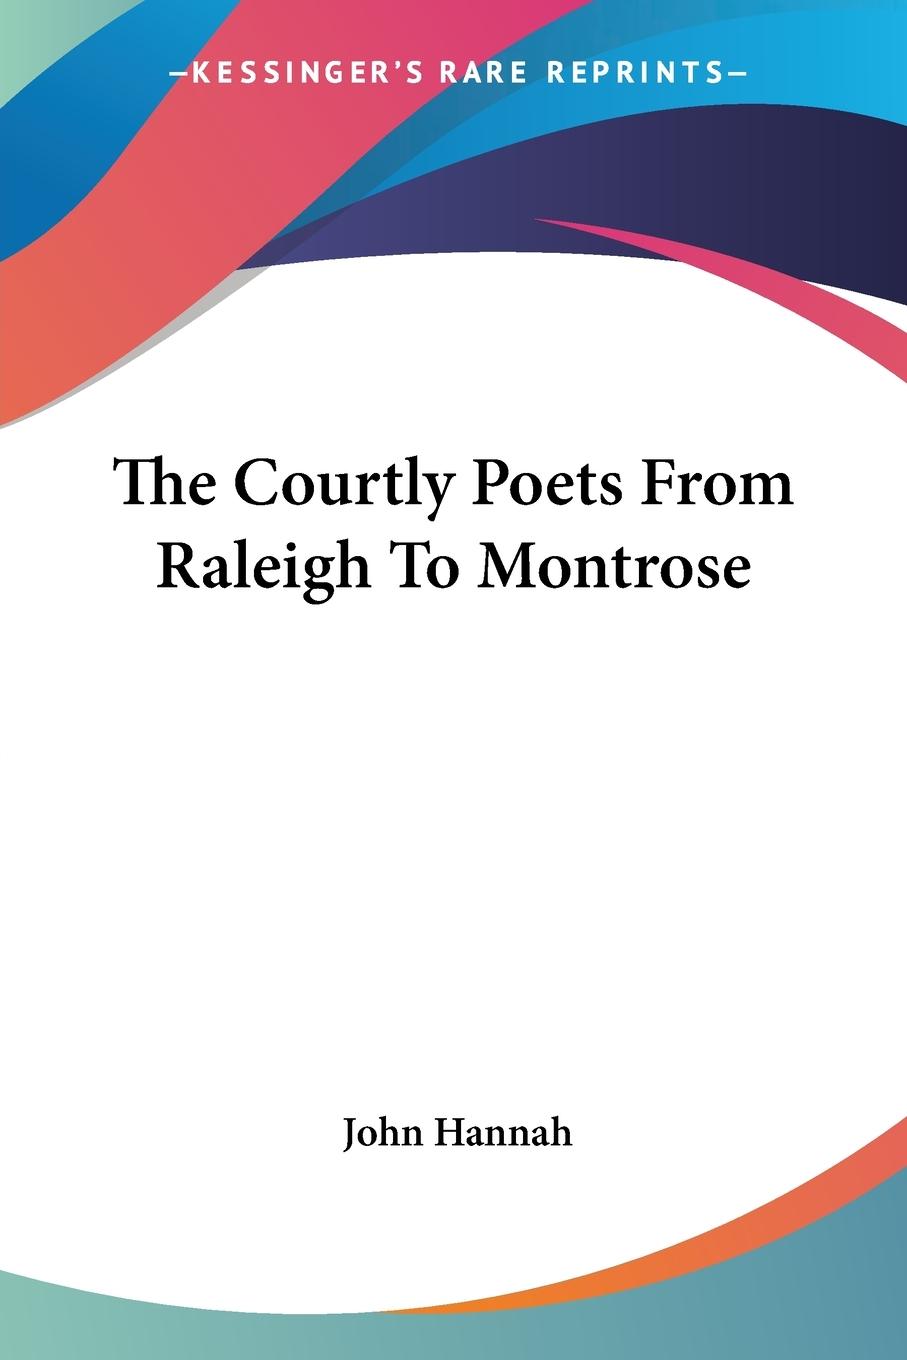 The Courtly Poets From Raleigh To Montrose